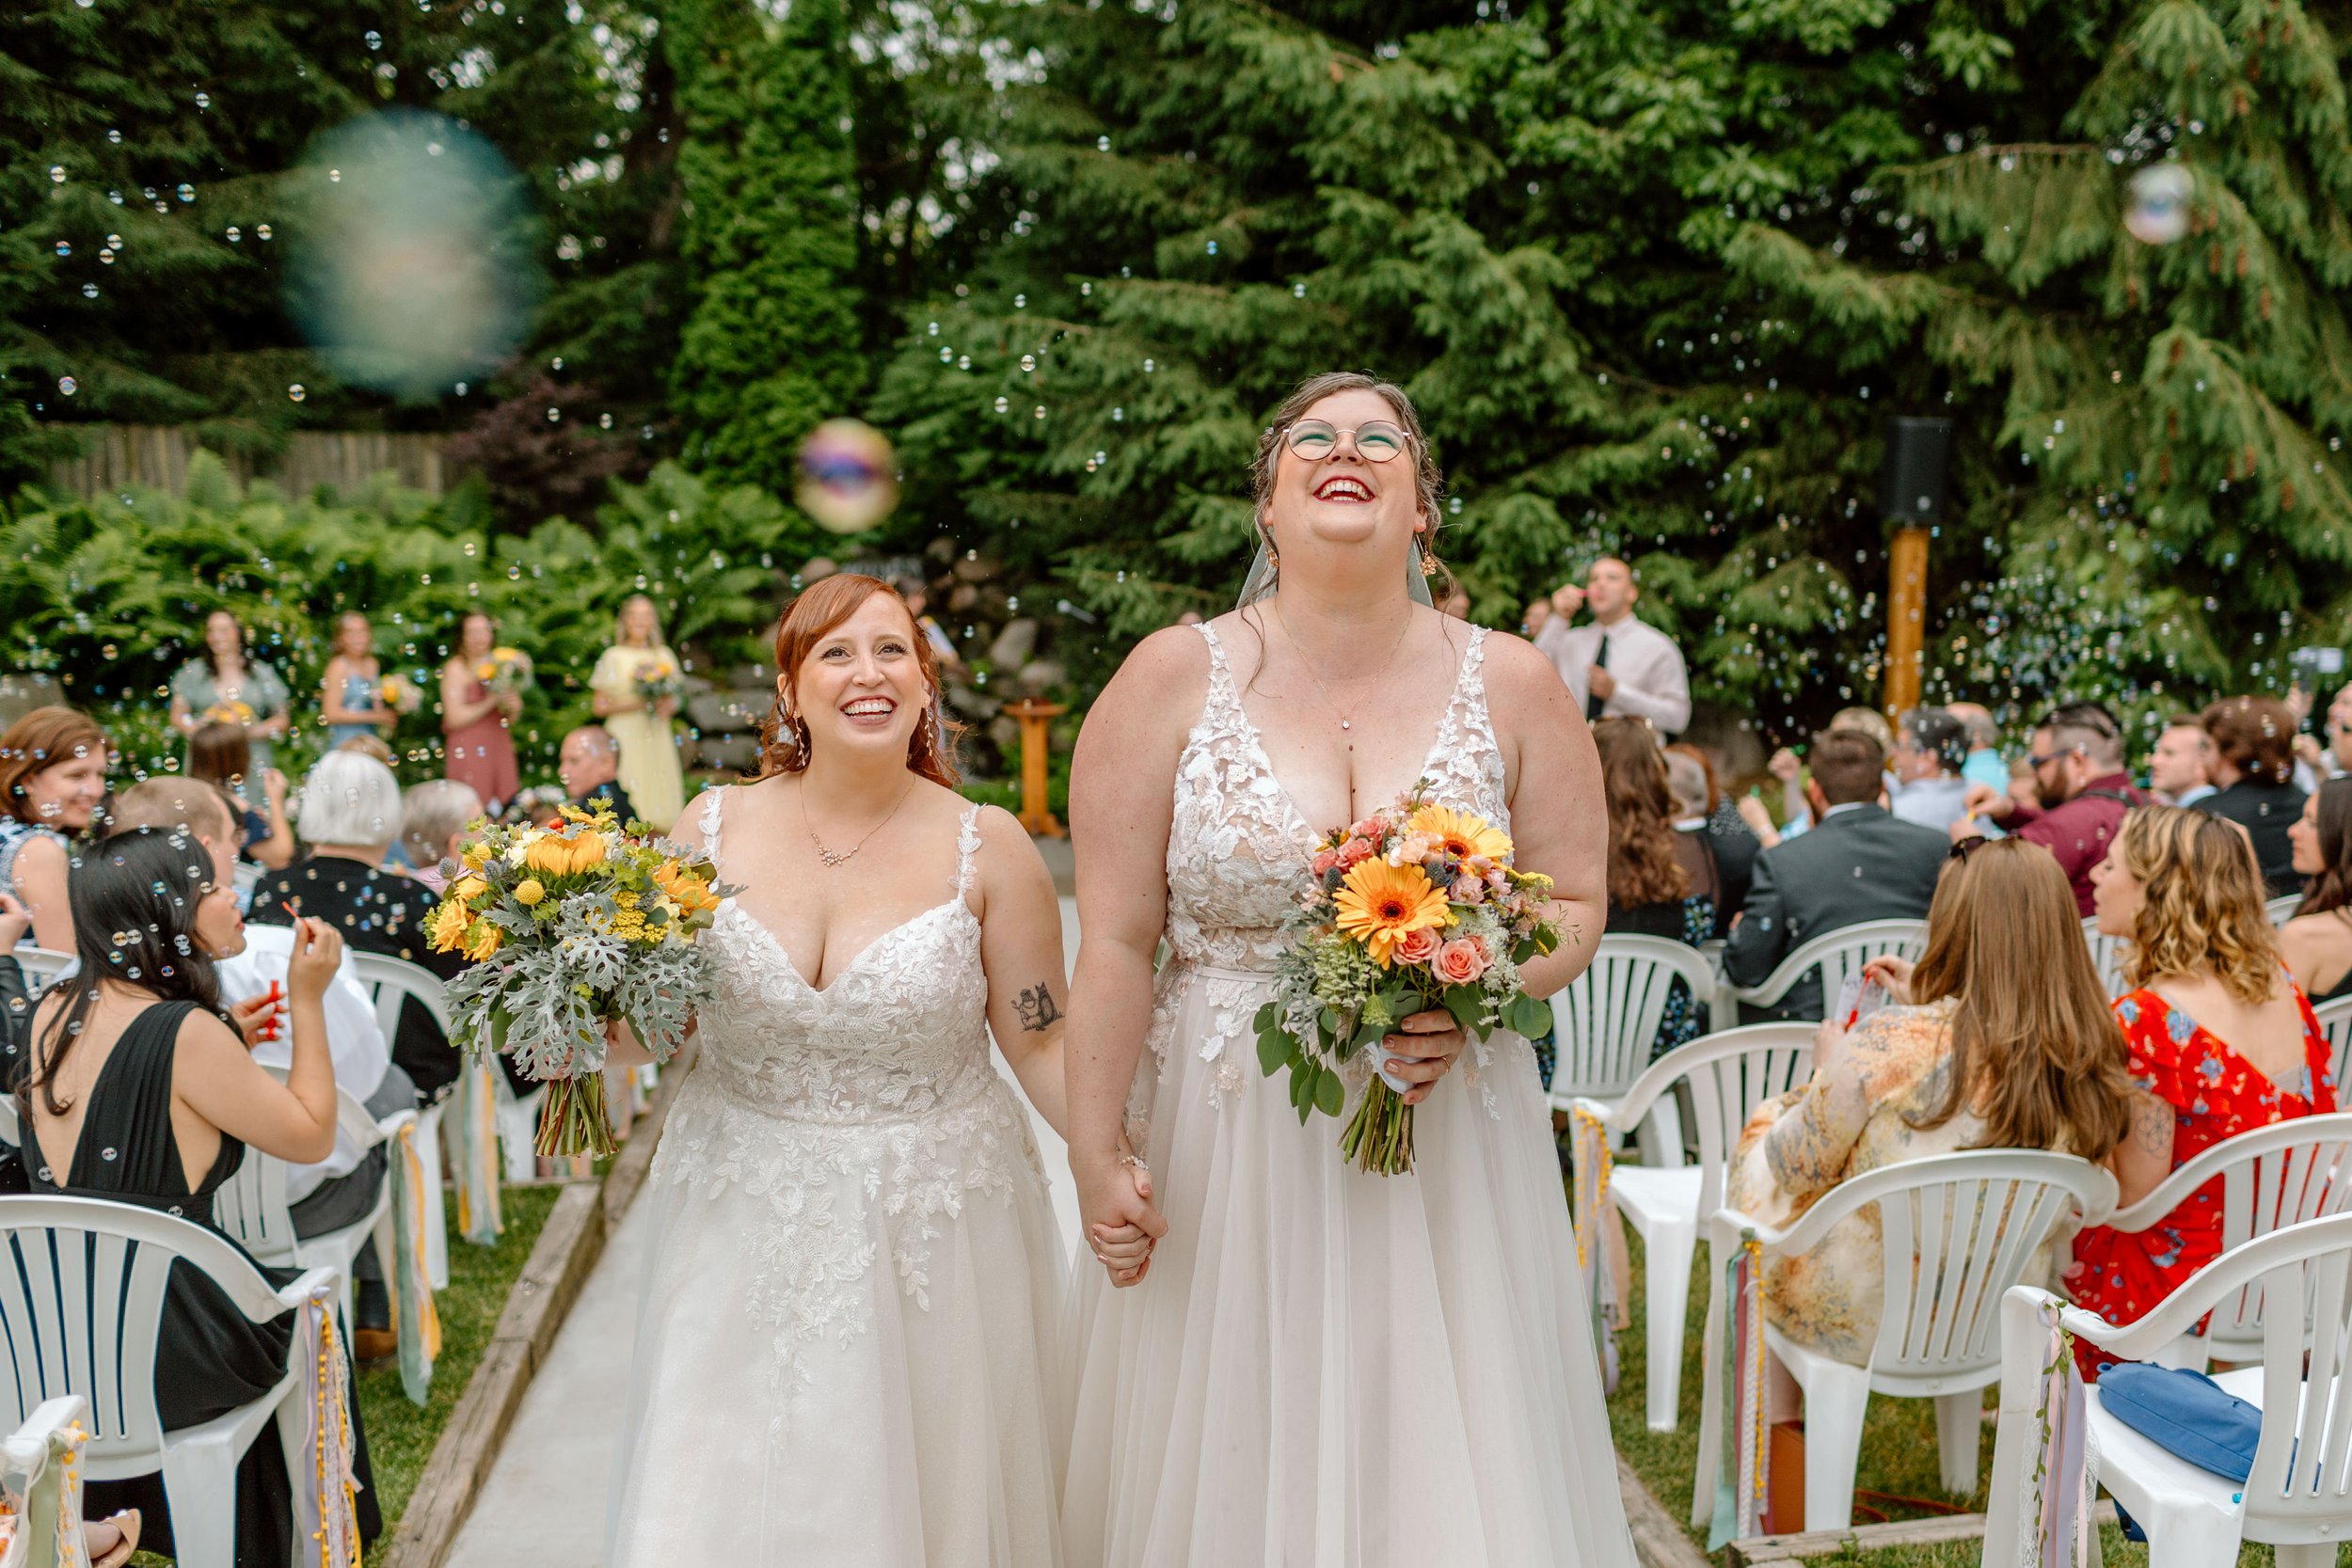  two women walk back up the aisle after getting married, smiling as they are surrounded by bubbles 